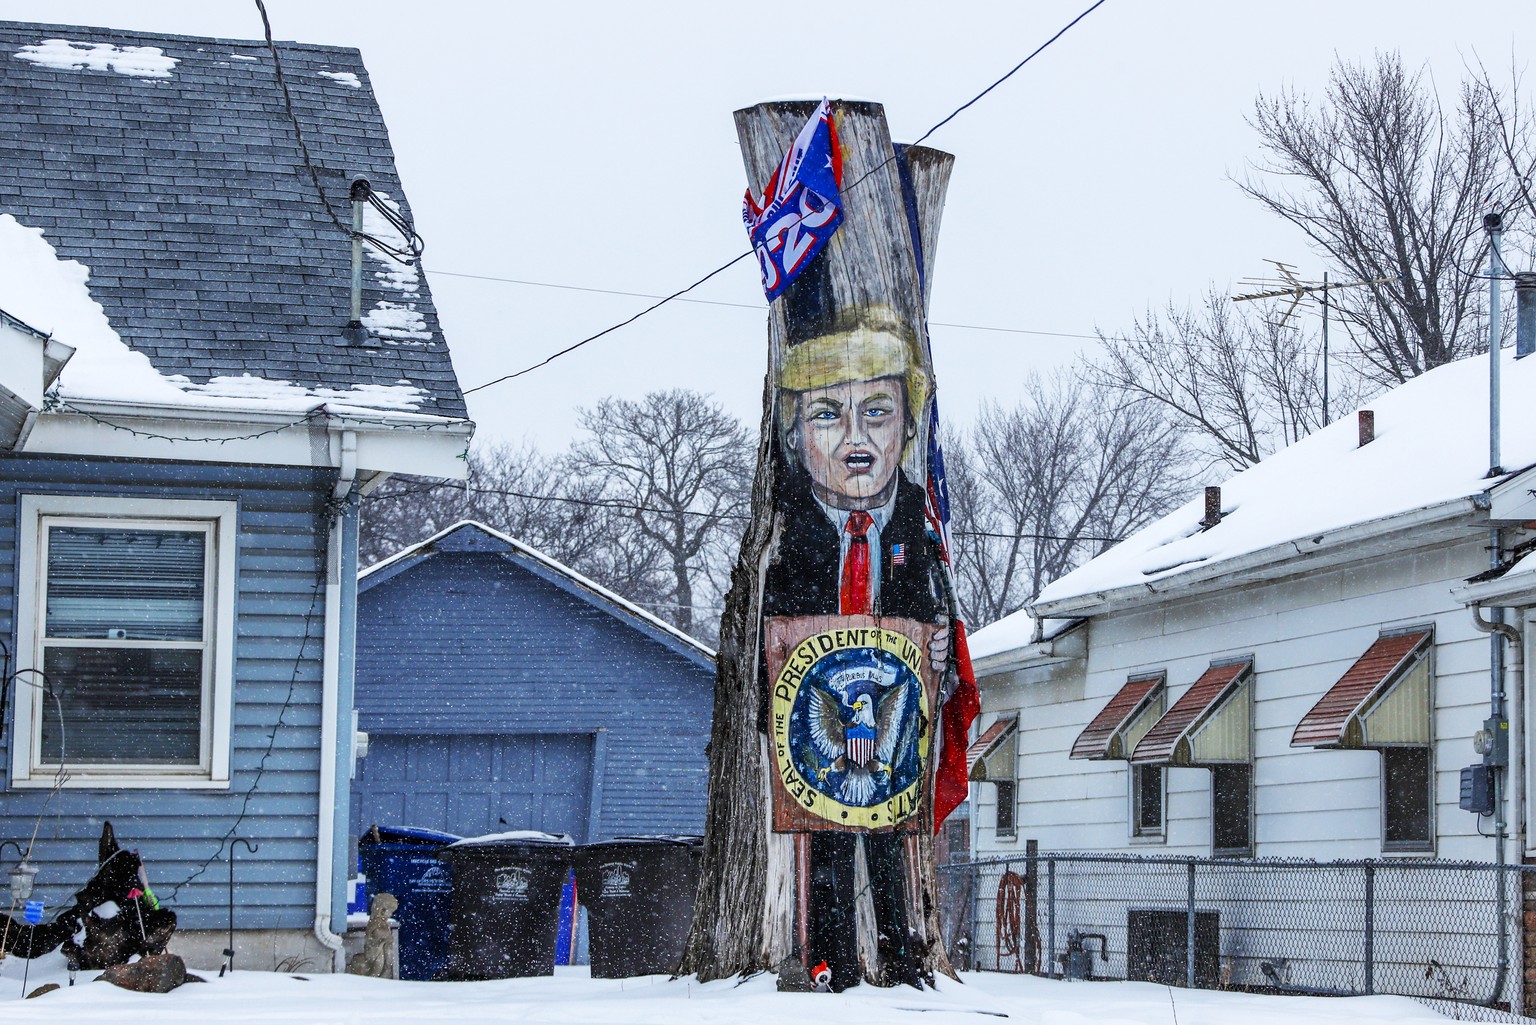 This Jan. 24, 2020, photo shows a tree stump painted in the front yard of a home in Des Moines, Iowa. (AP Photo/Gene J. Puskar)